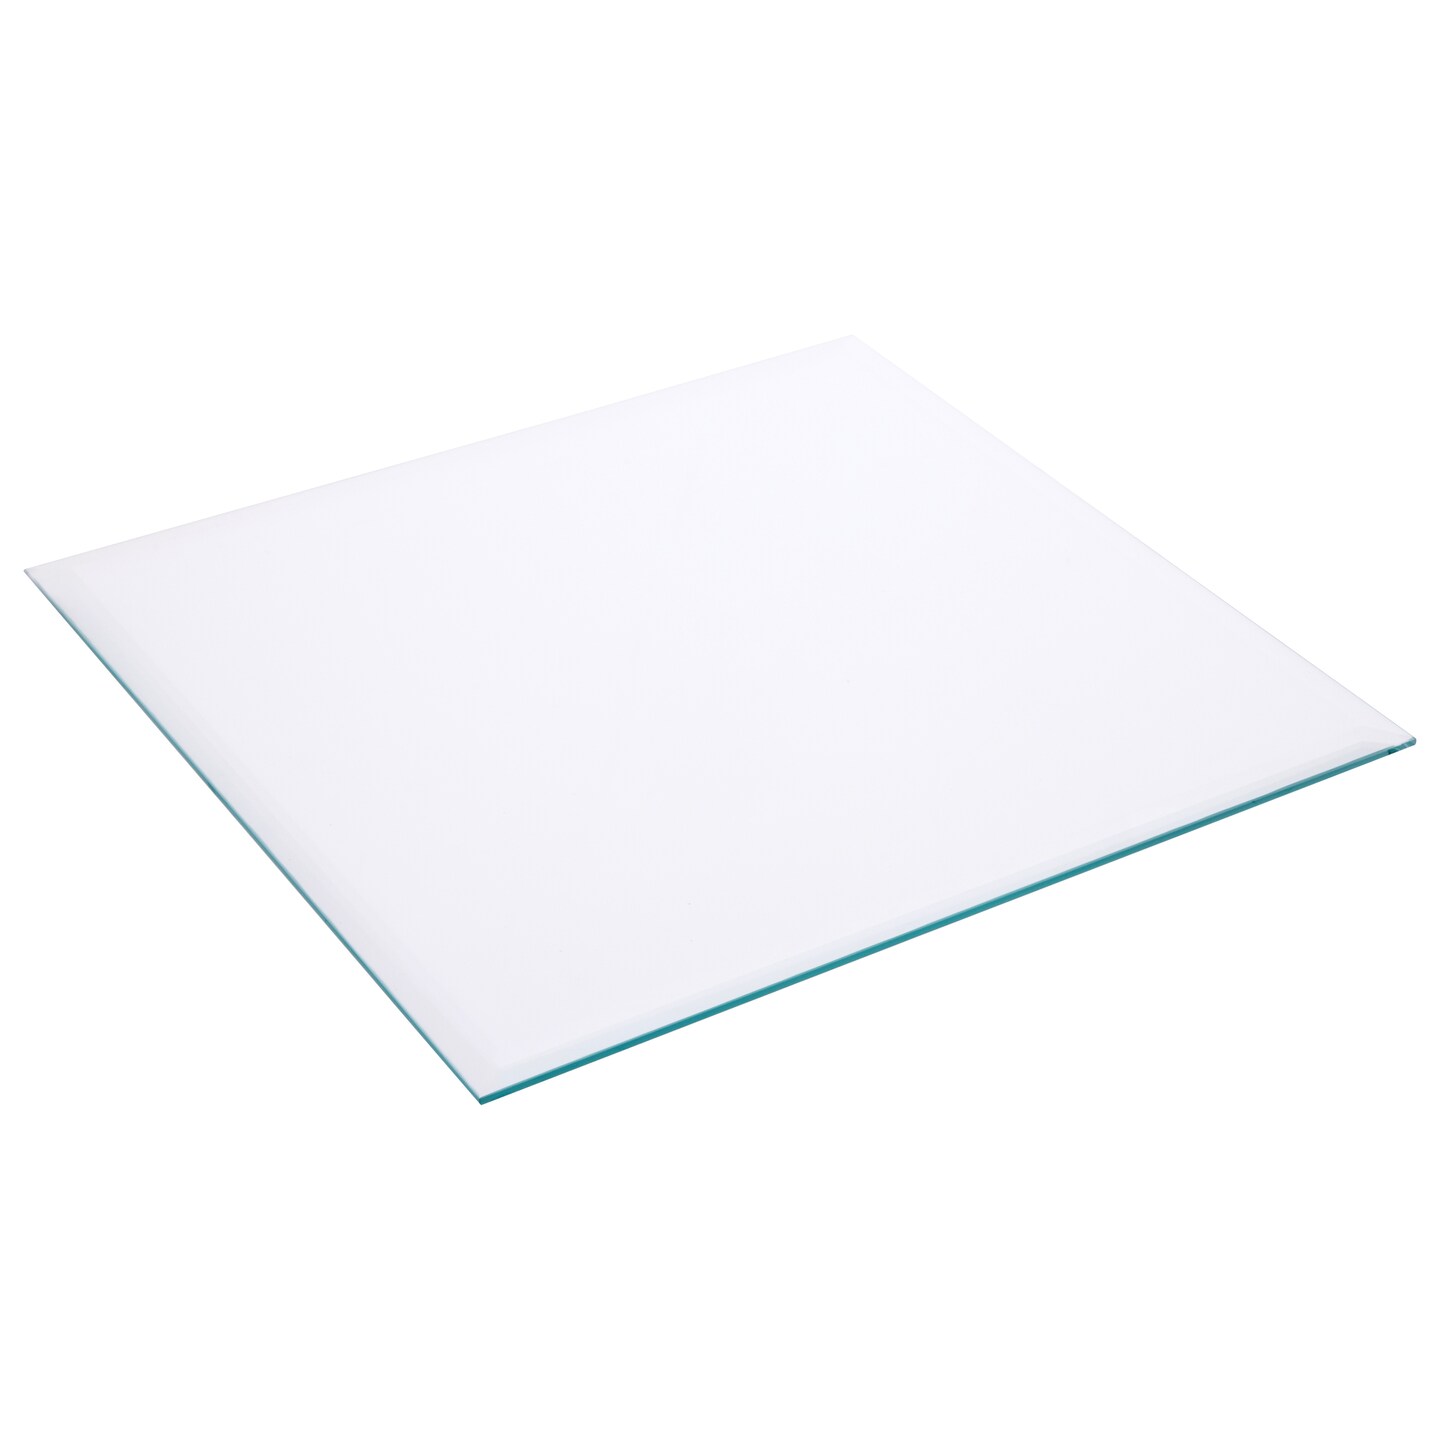 Plymor Square 5mm Beveled Clear Glass, 12 inch x 12 inch